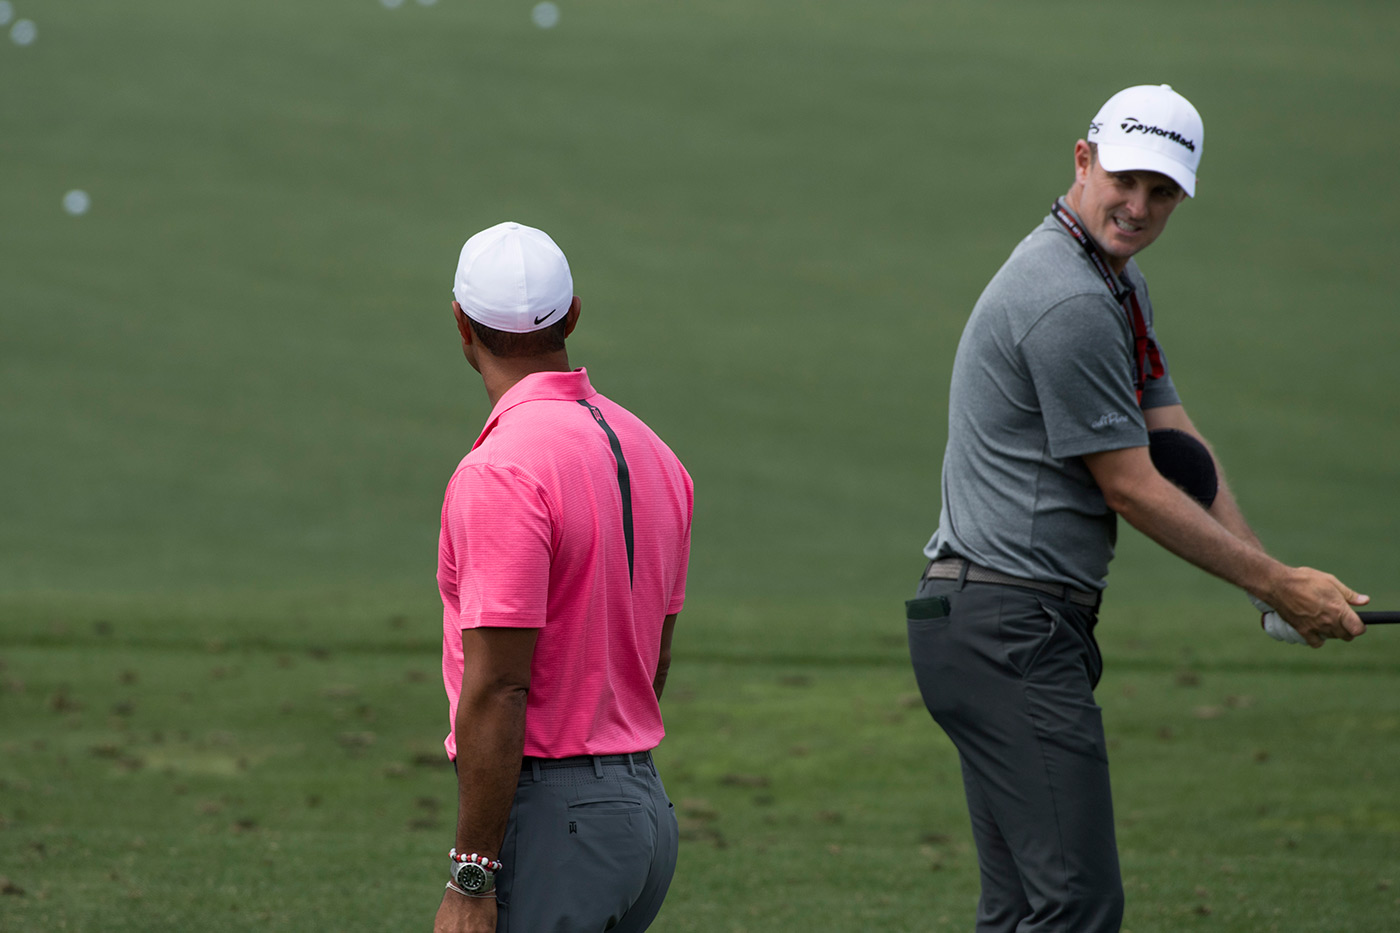 Justin Rose thinking much more than Tiger Woods pairing on Saturday